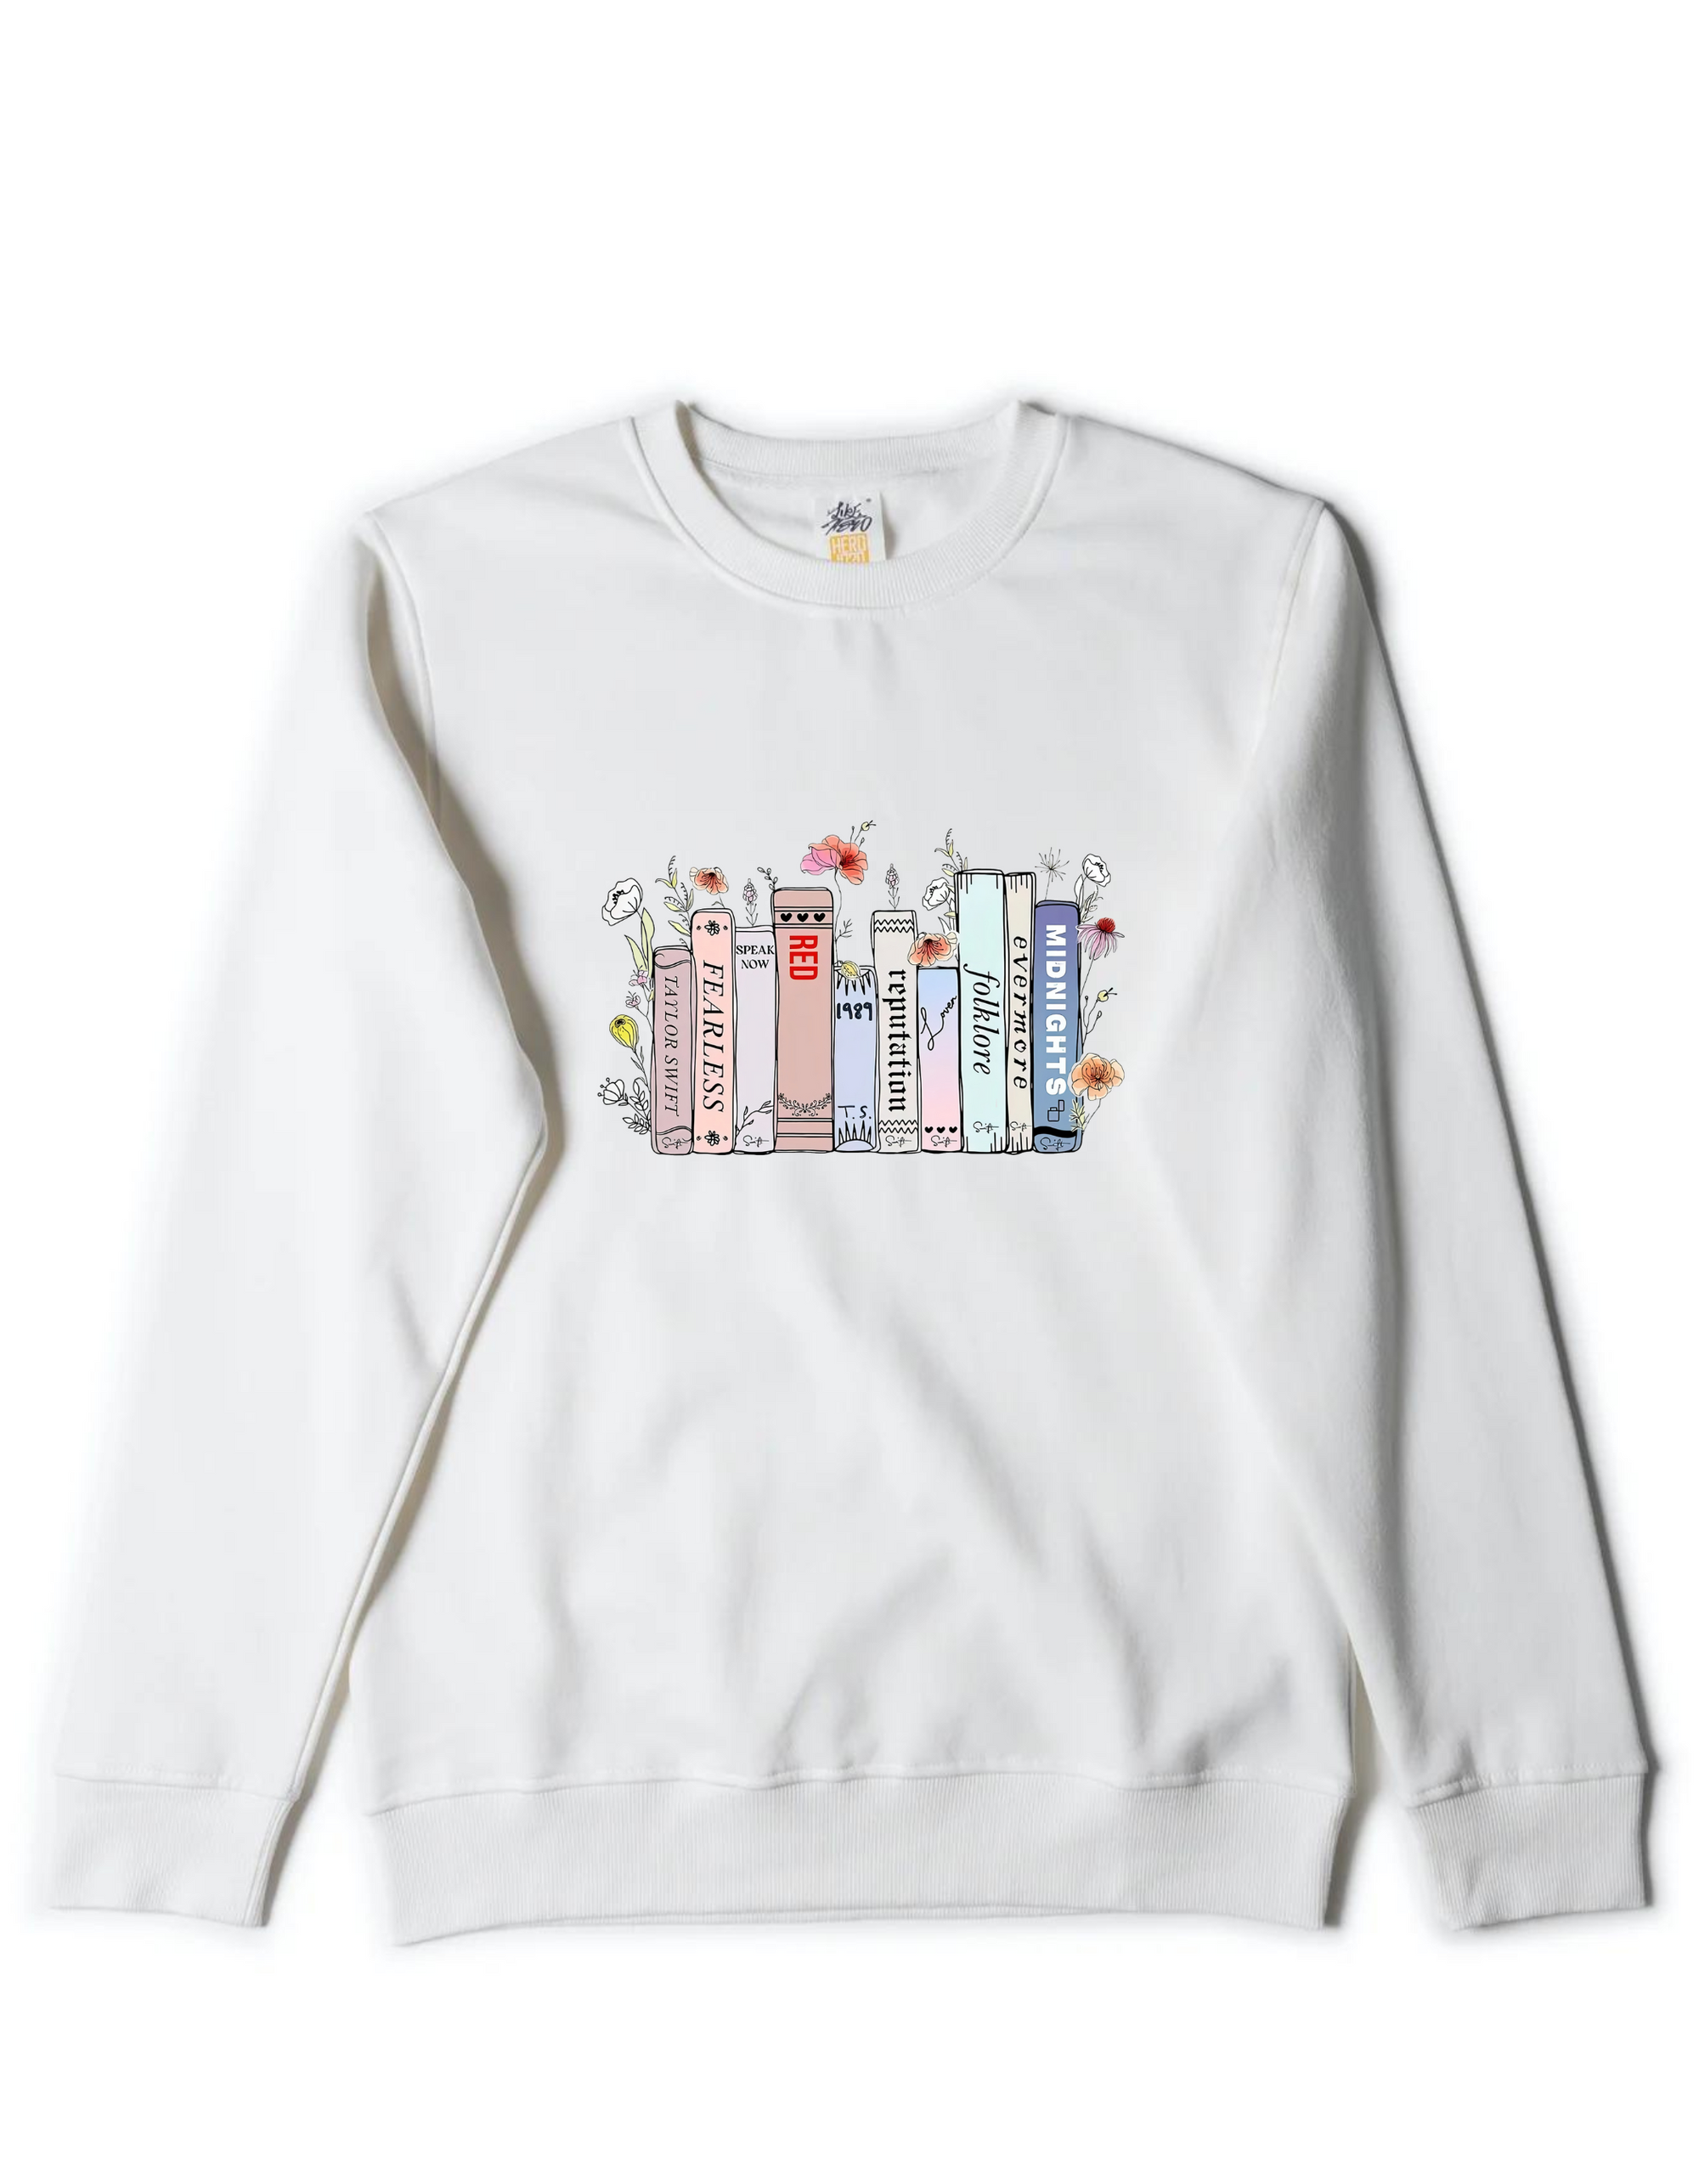 Taylor Swift Album Cover/Books Crew Neck Sweater ADULT or YOUTH